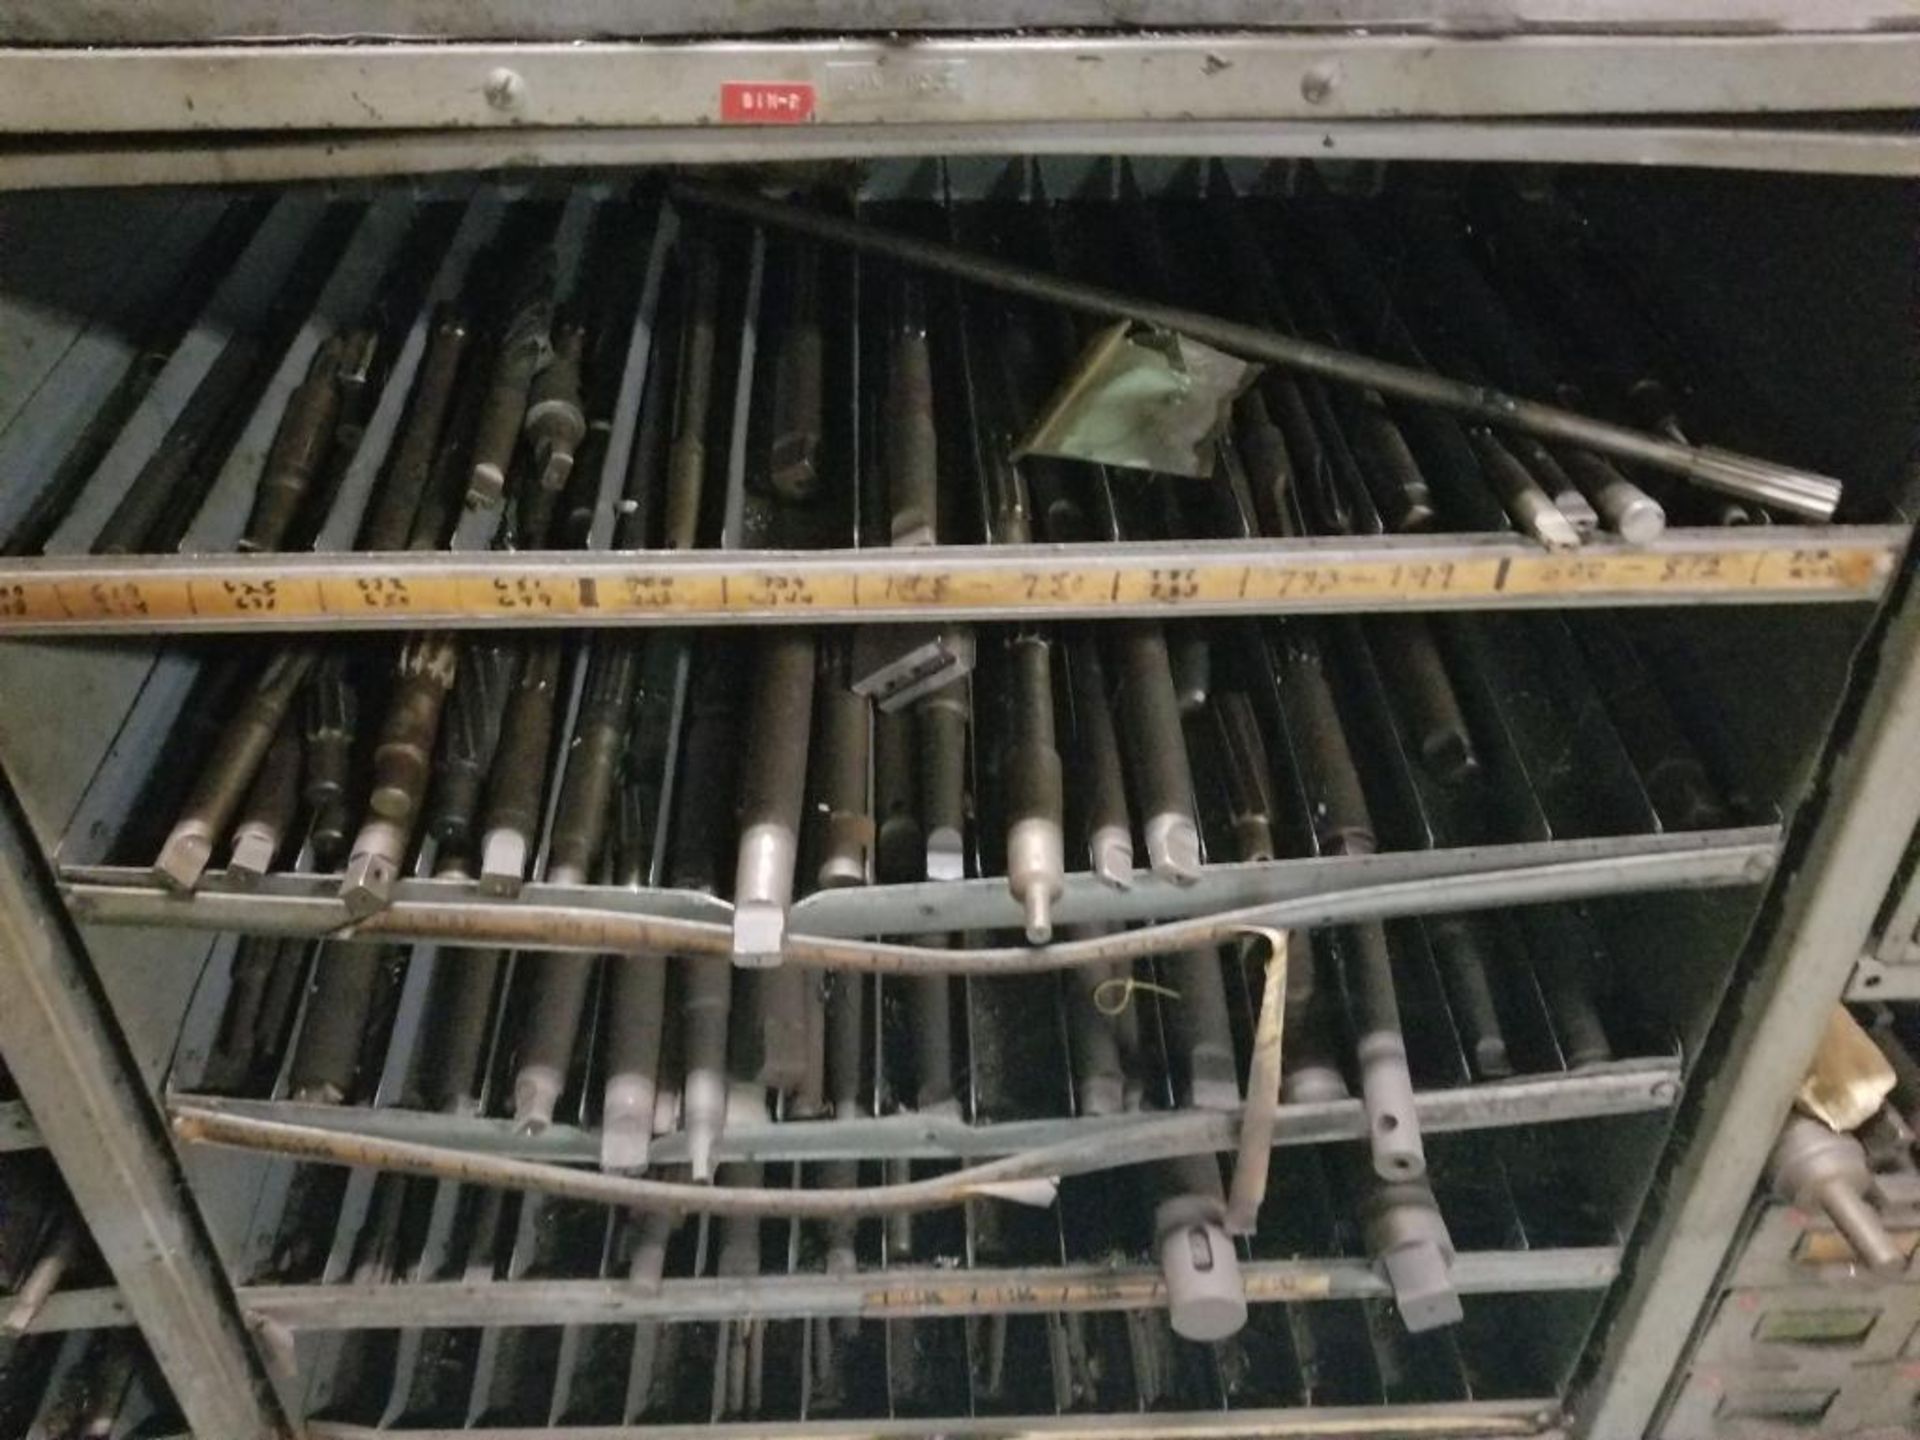 Drill index shelf with all drills as pictured. This lot is for one vertical section pictured. - Image 4 of 11